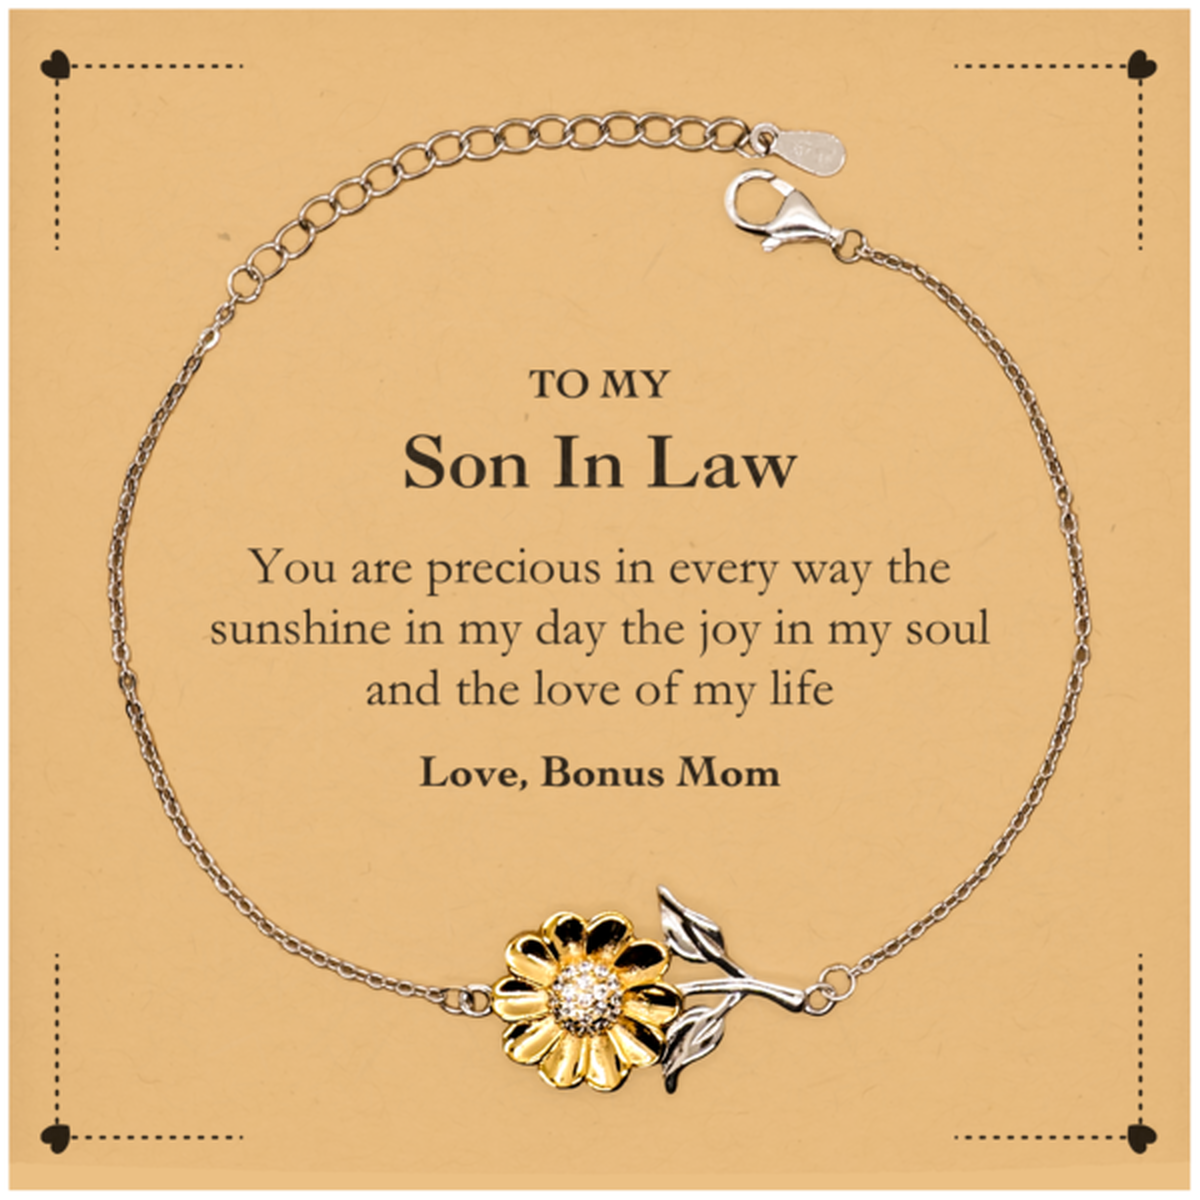 Graduation Gifts for Son In Law Sunflower Bracelet Present from Bonus Mom, Christmas Son In Law Birthday Gifts Son In Law You are precious in every way the sunshine in my day. Love, Bonus Mom